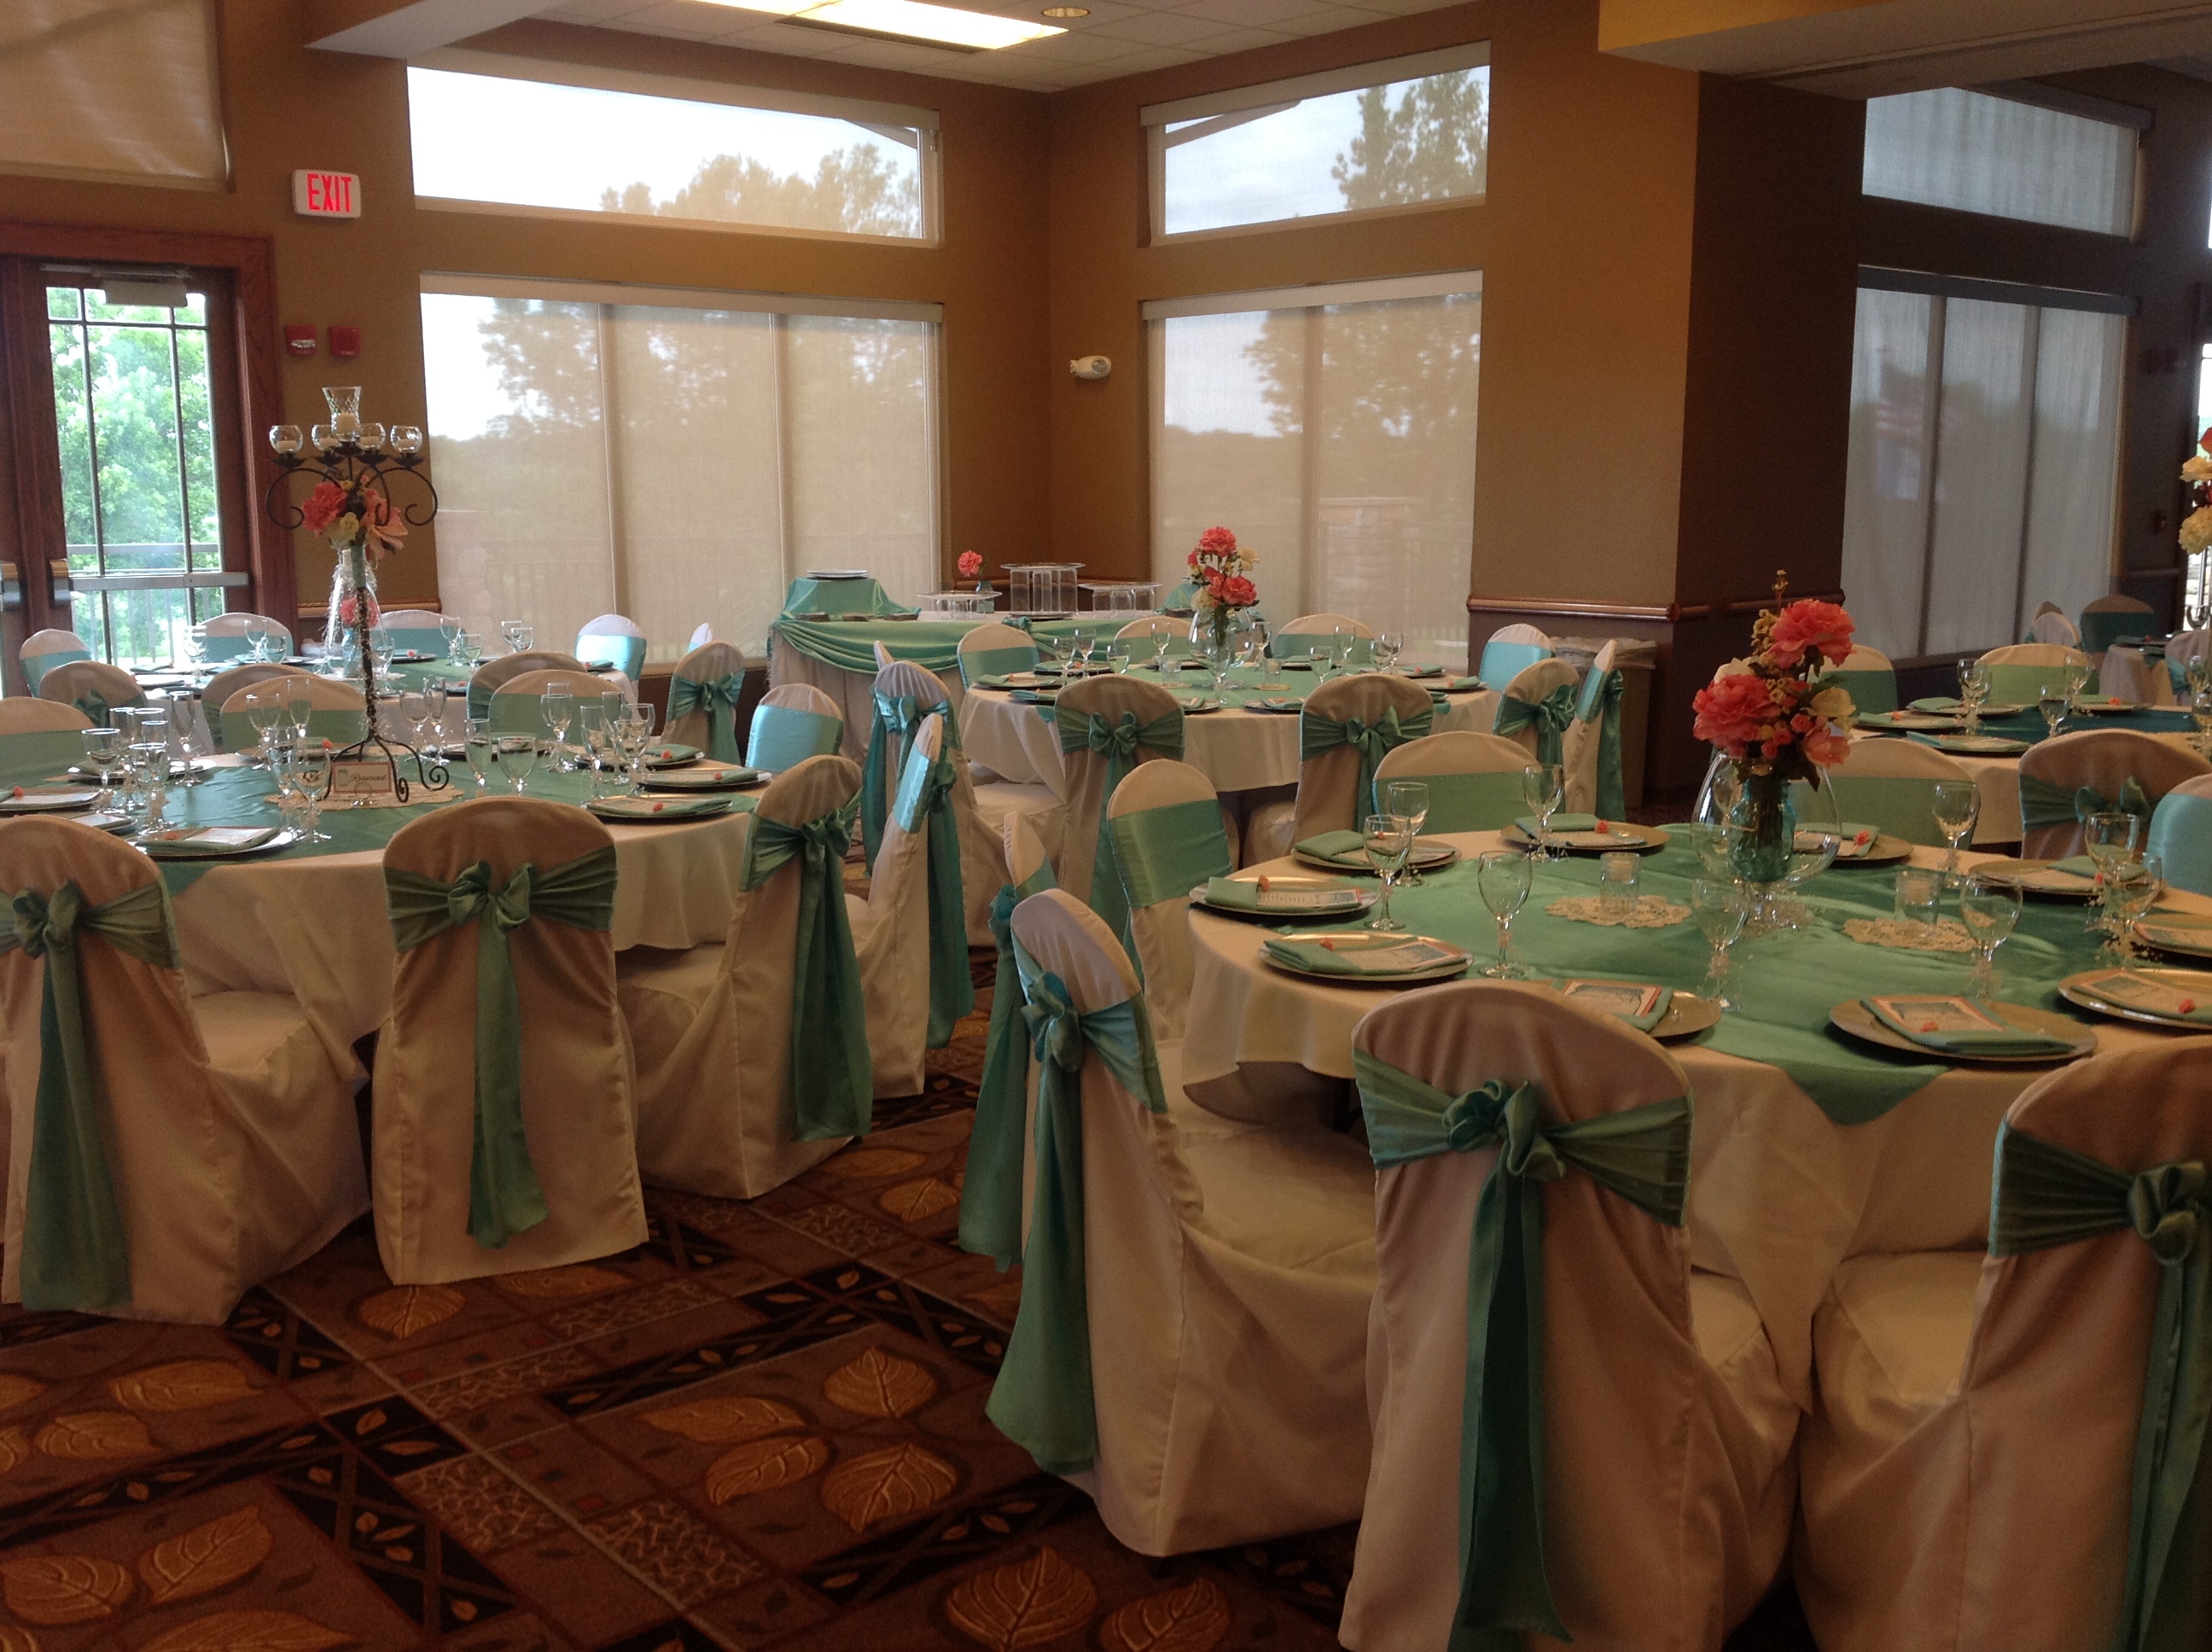 Wedding reception with teal table settings and pink flowers